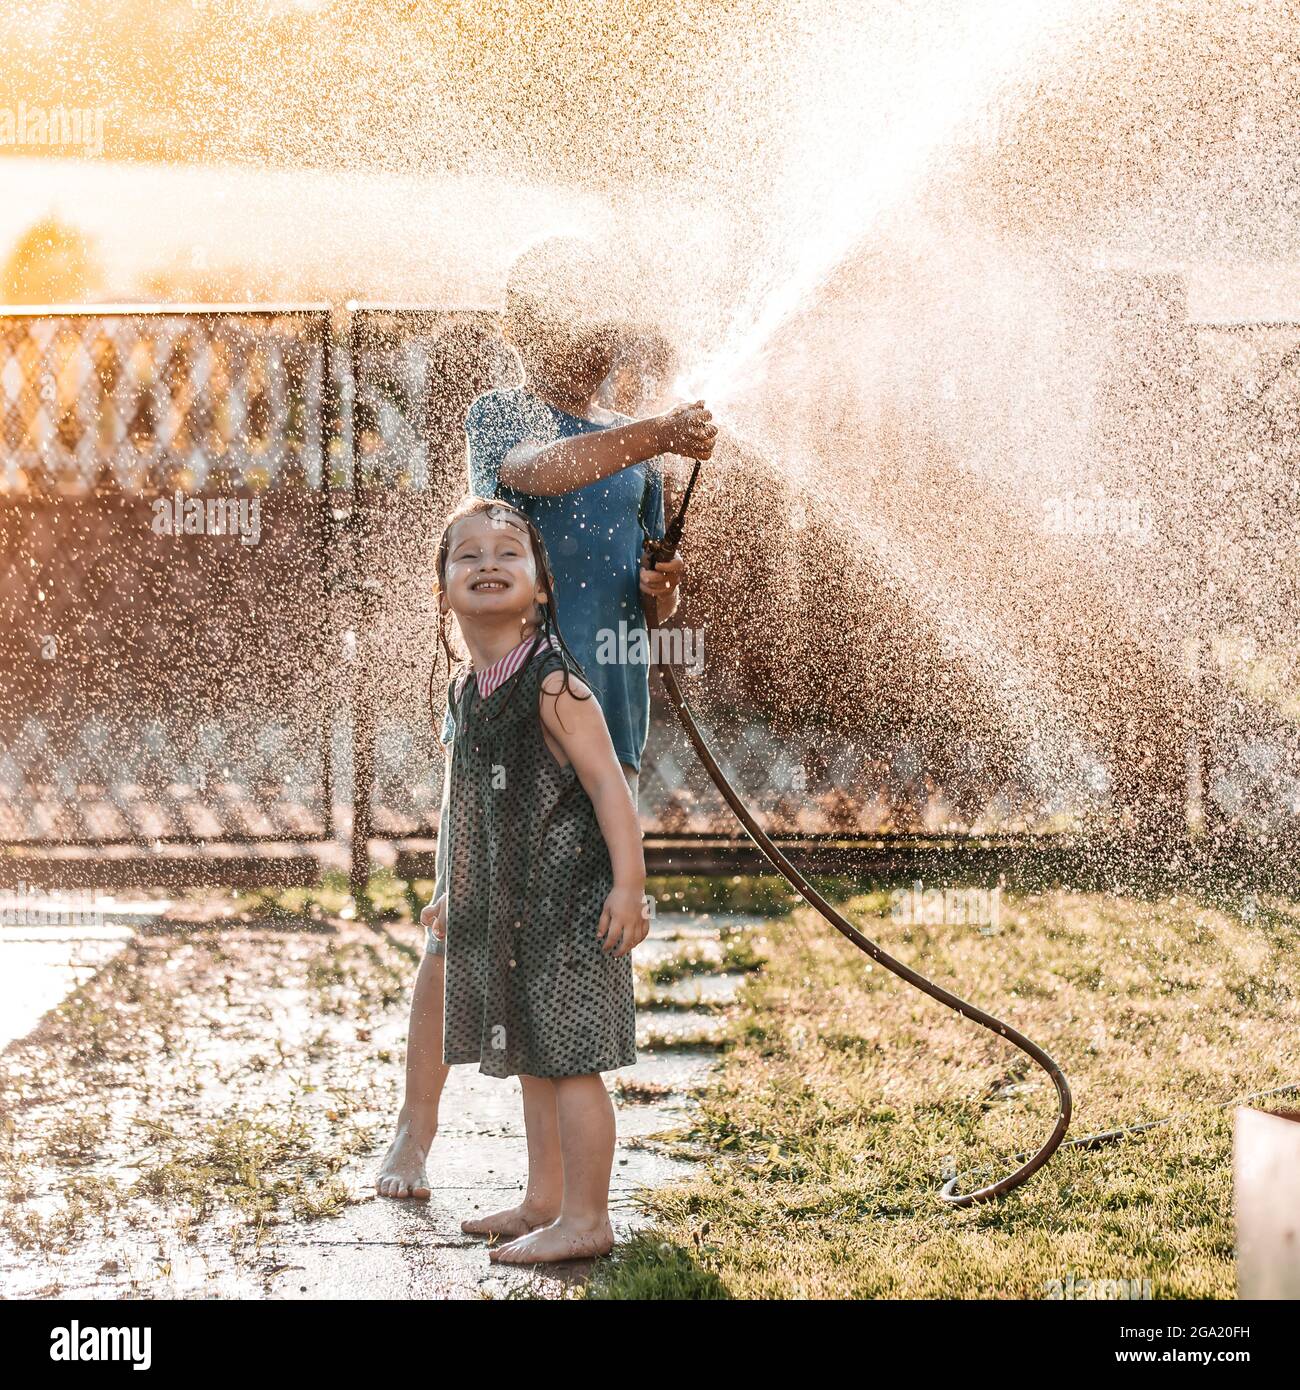 little children playing together with a garden hose on hot and sunny summer day on sunset Stock Photo